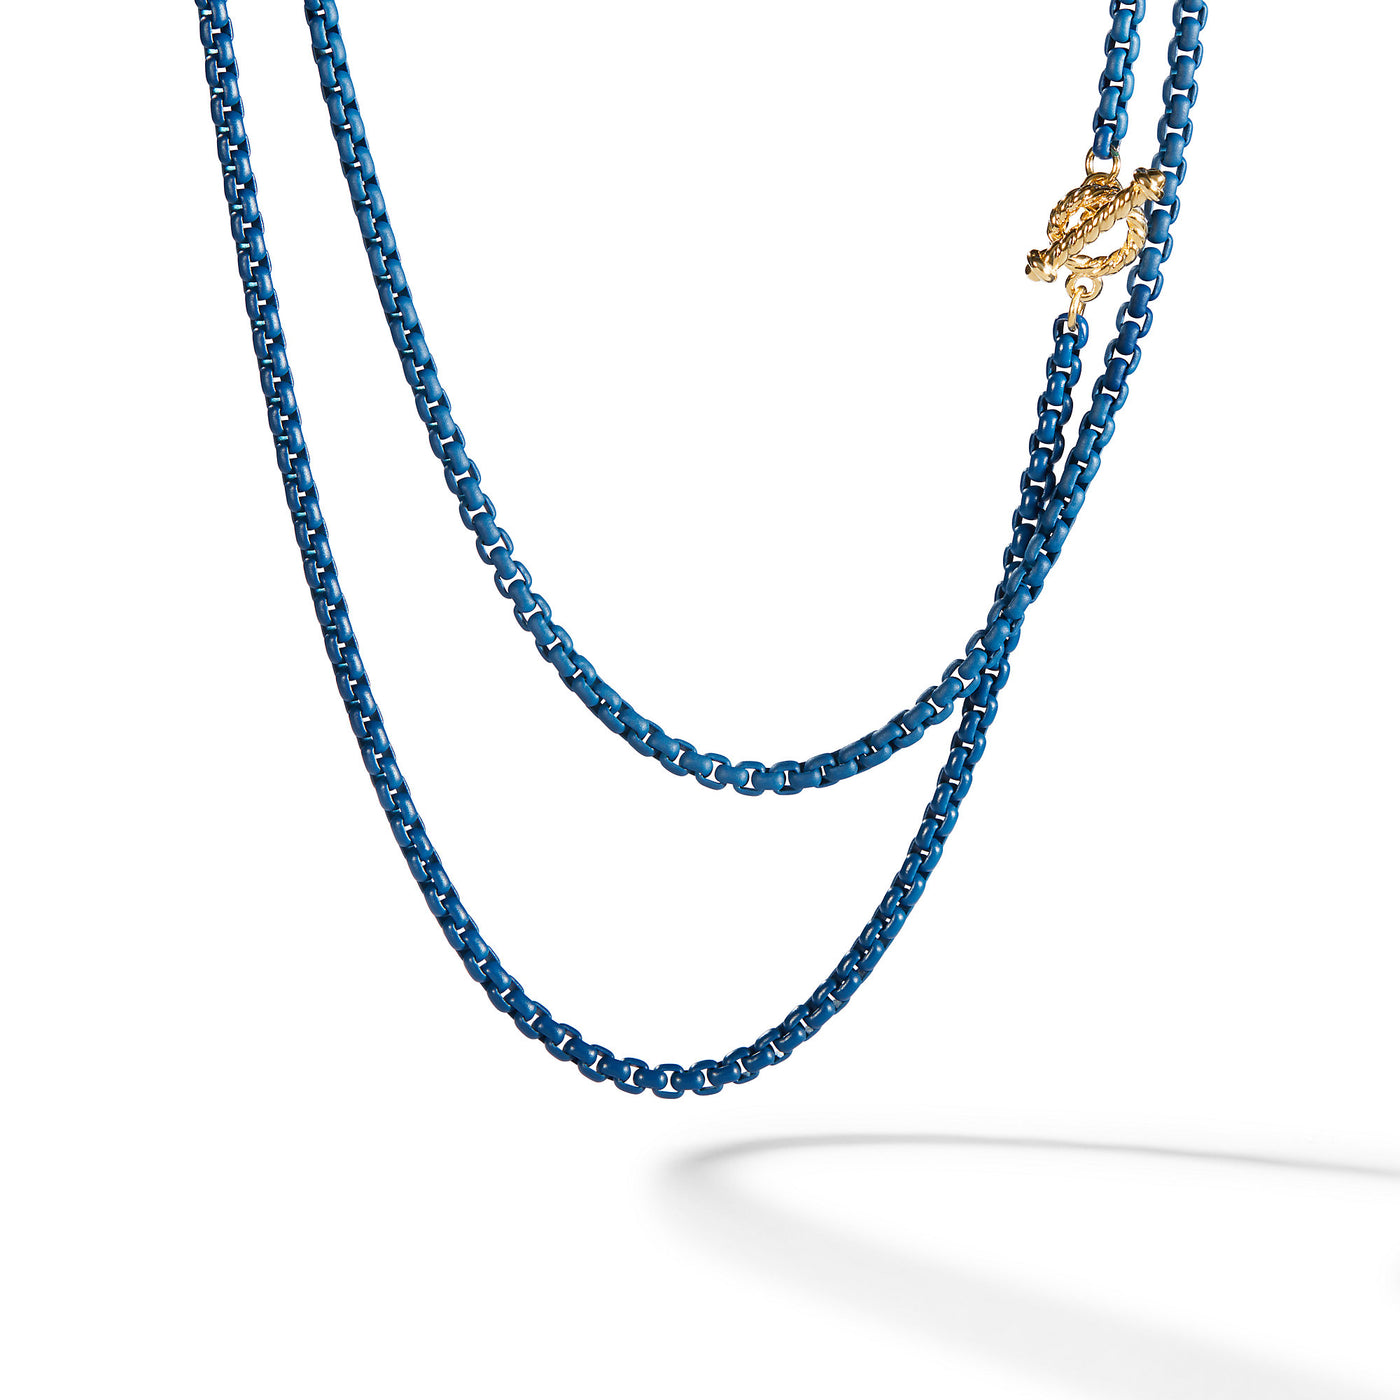 DY Bel Aire Color Box Chain Necklace in Navy Acrylic with 14K Yellow Gold Accents\, 2.7mm